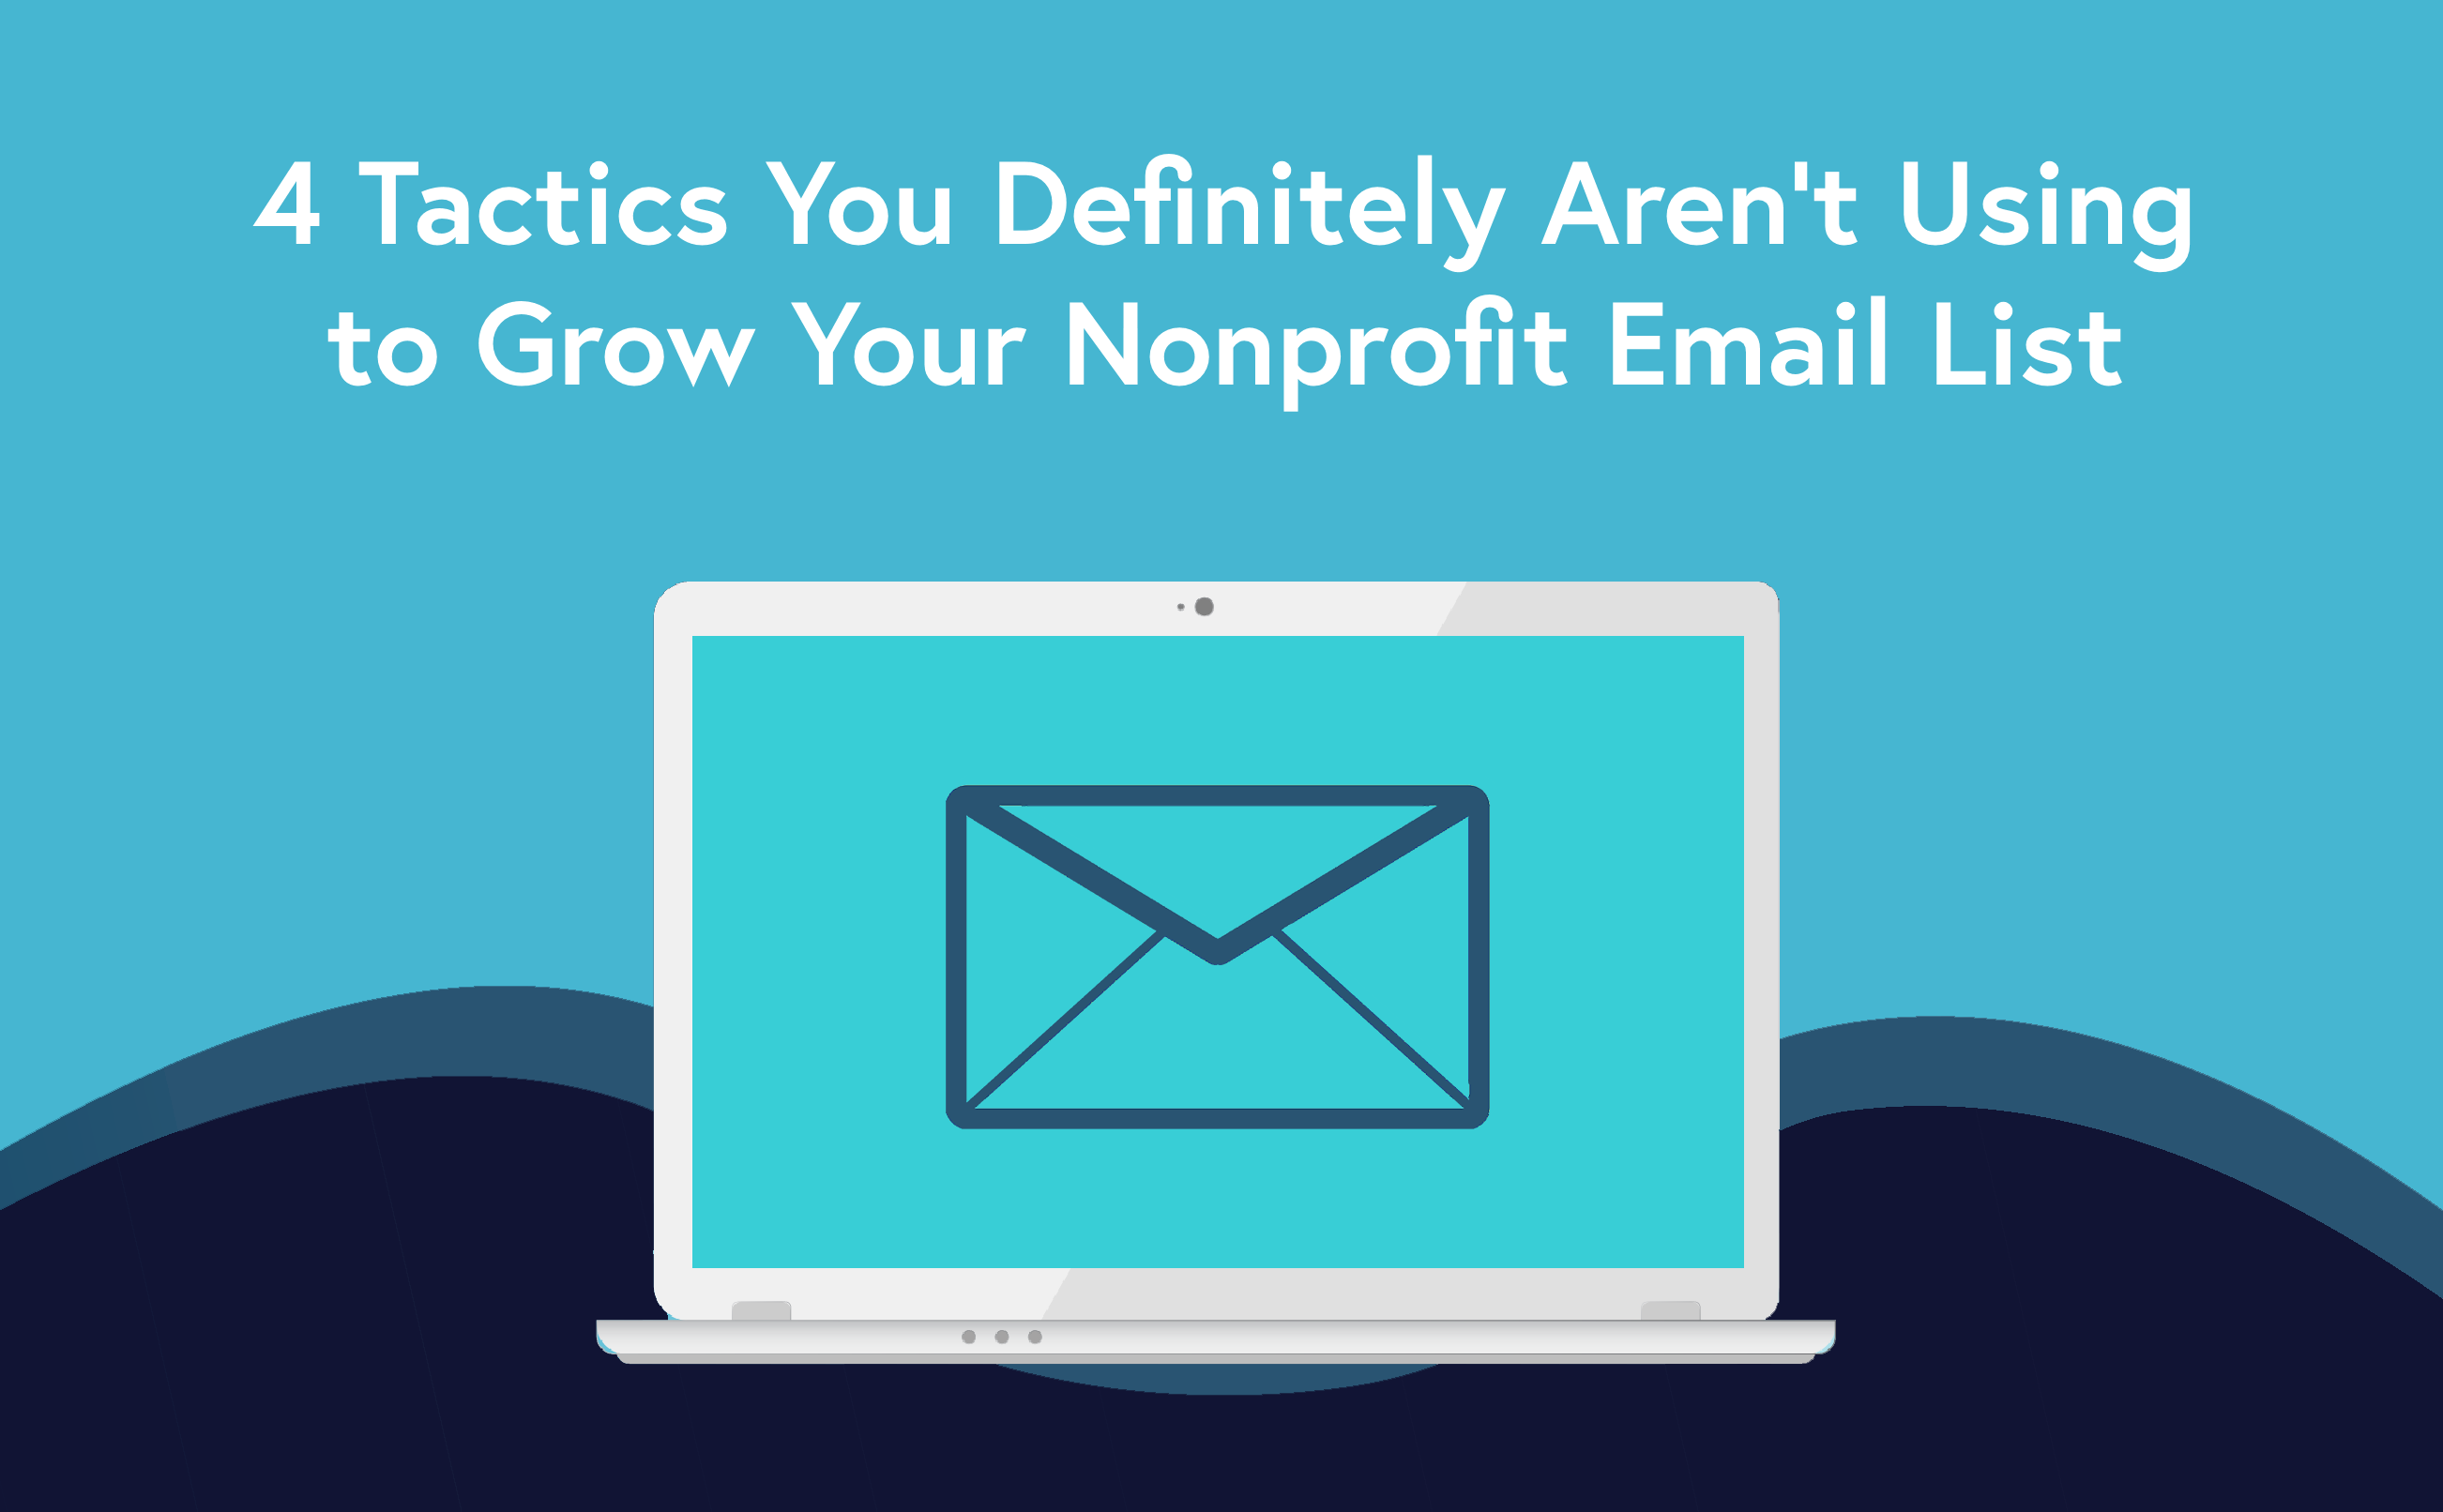 5 Tactics You Definitely Aren’t Using to Grow Your Nonprofit Email List